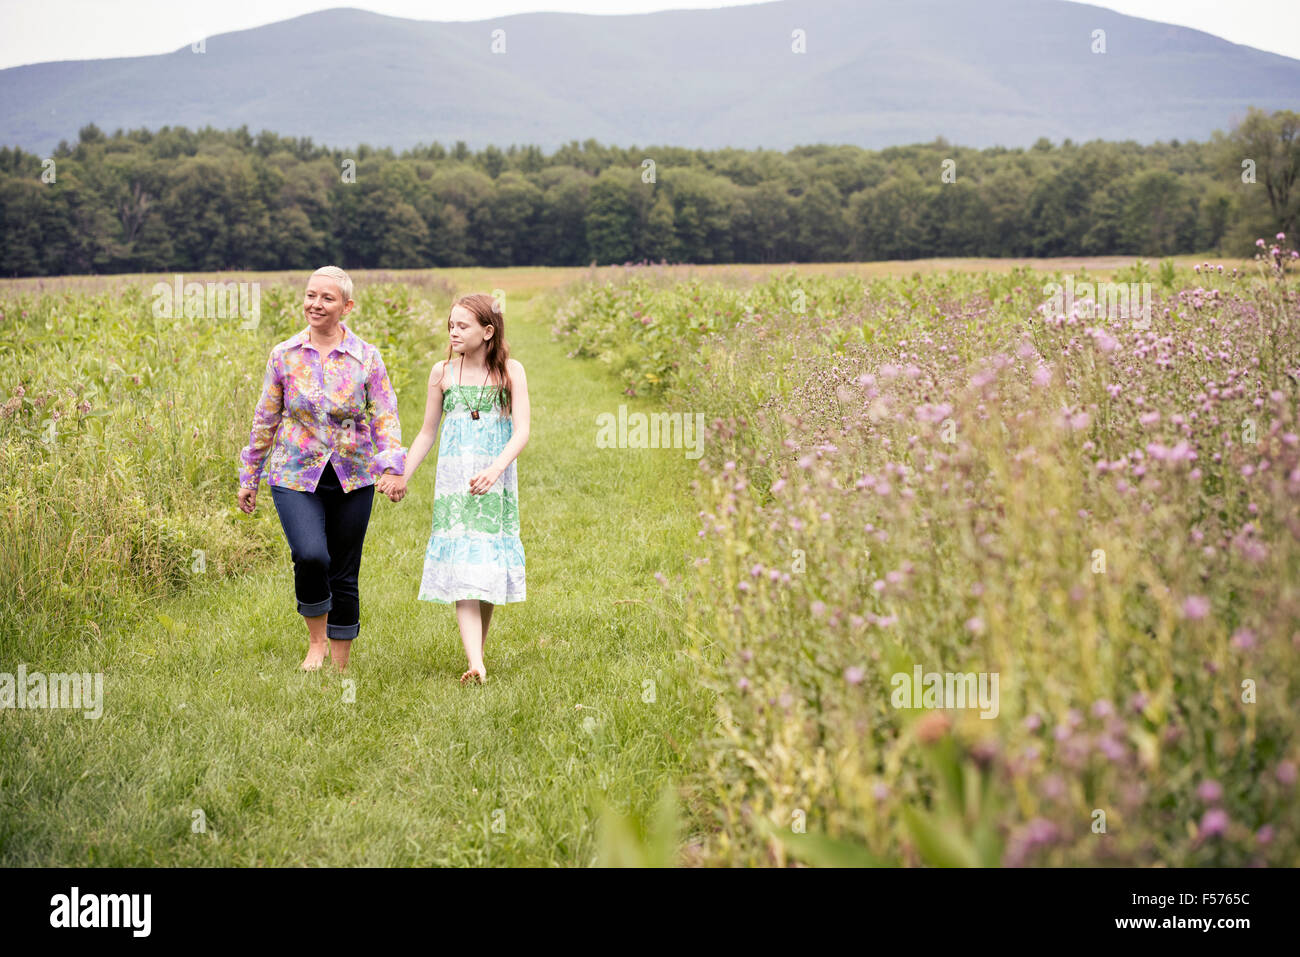 A mature woman and a young girl in a wildflower meadow. Stock Photo